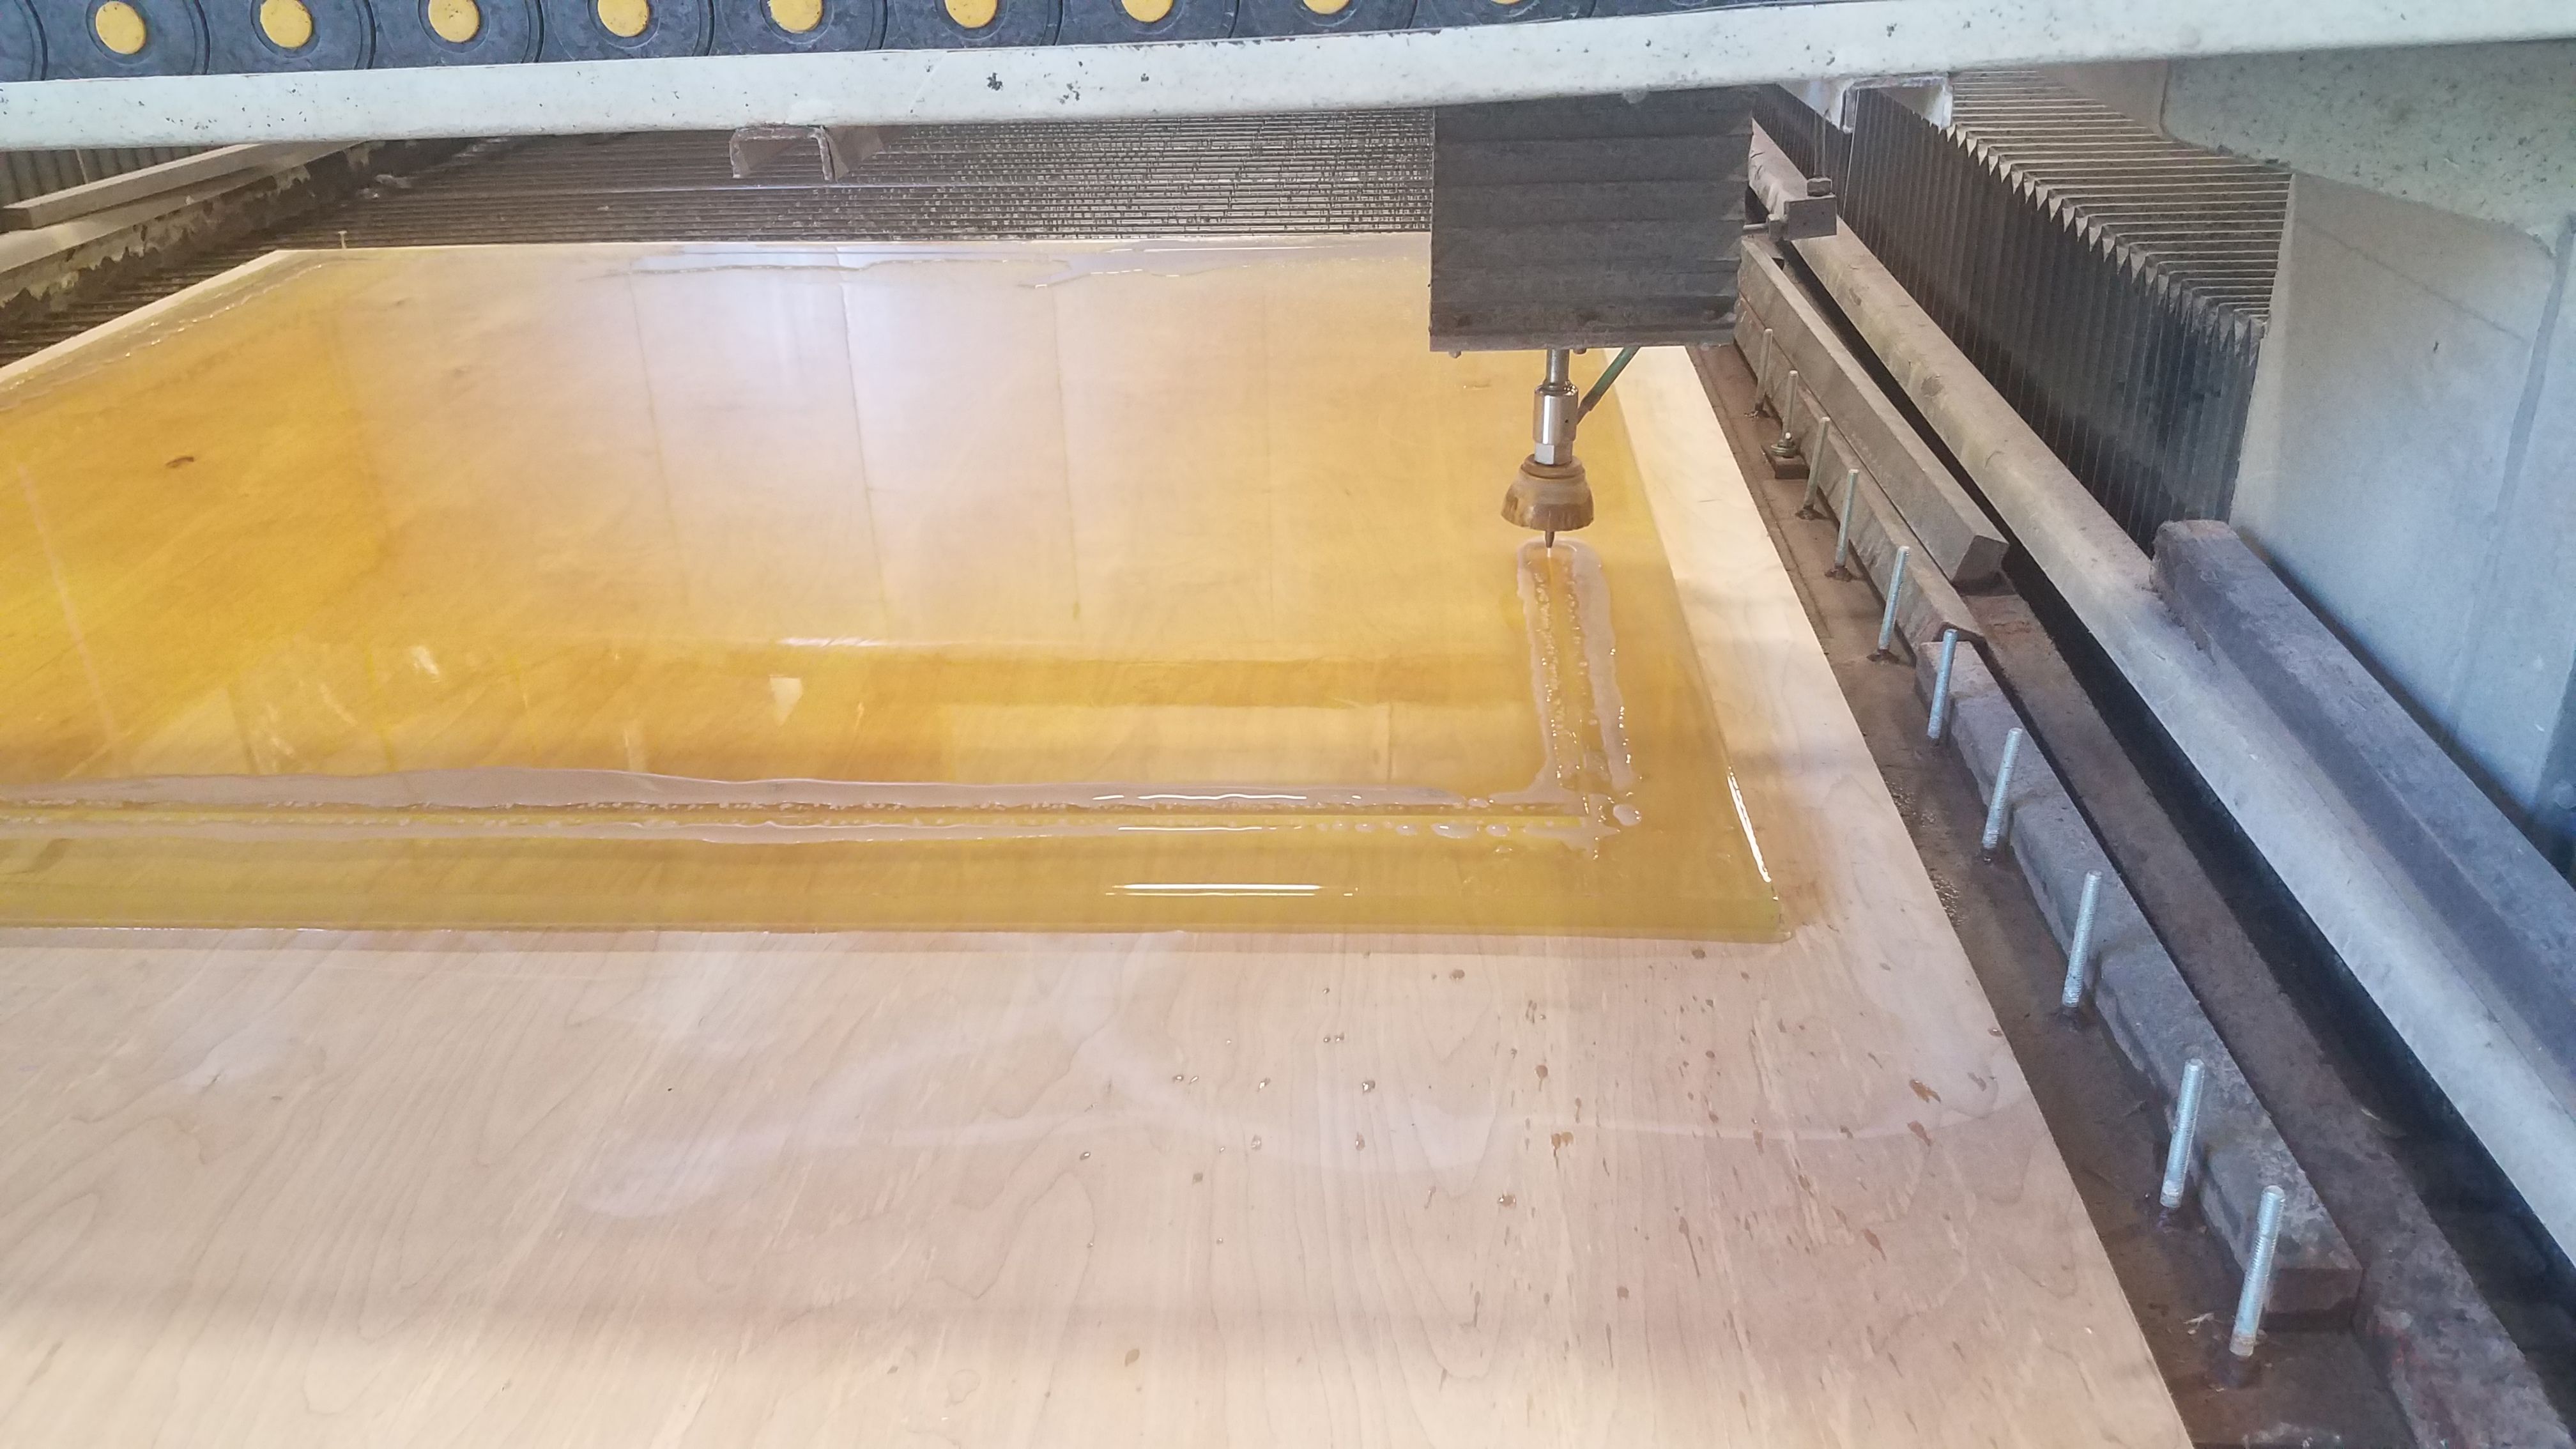 What Is A Water Jet Cutter?